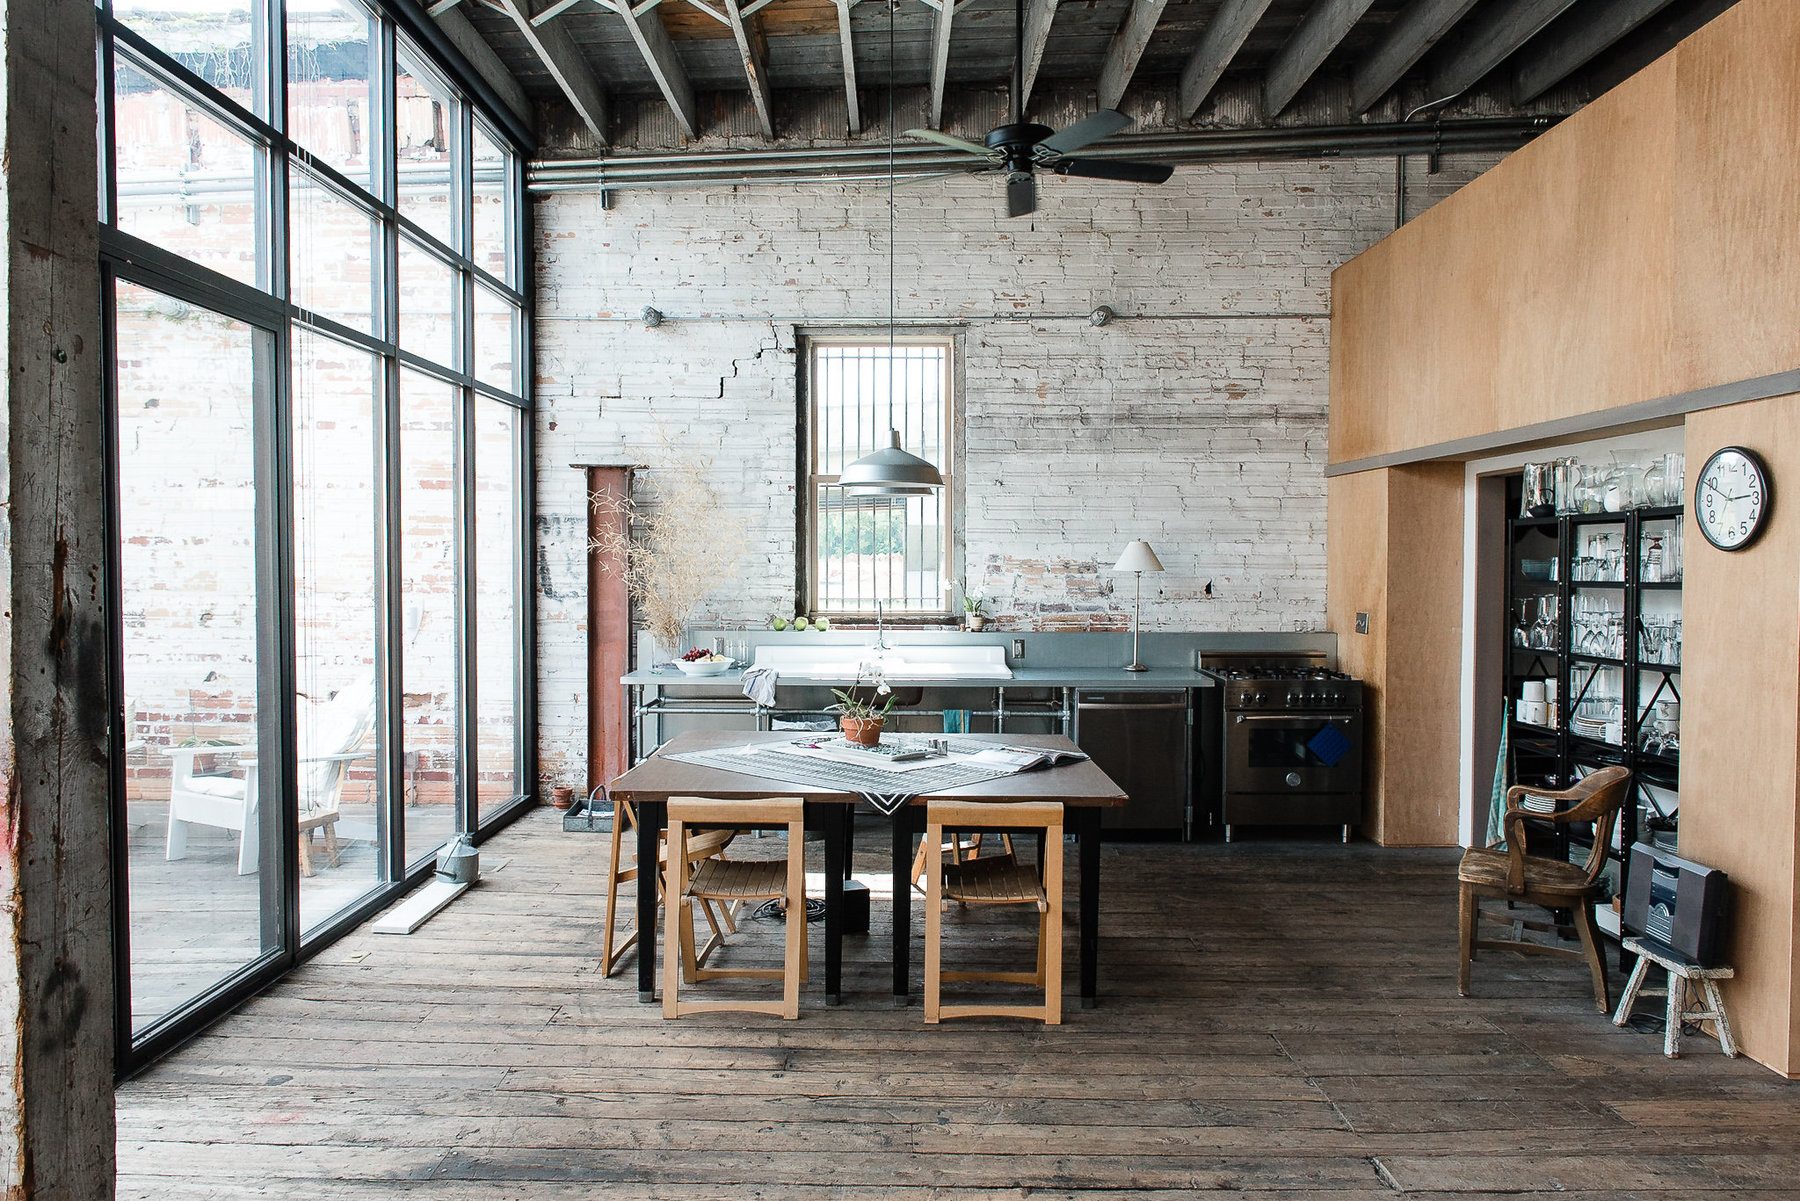 A 107-Year-Old Downtown Warehouse-Turned-Loft Space